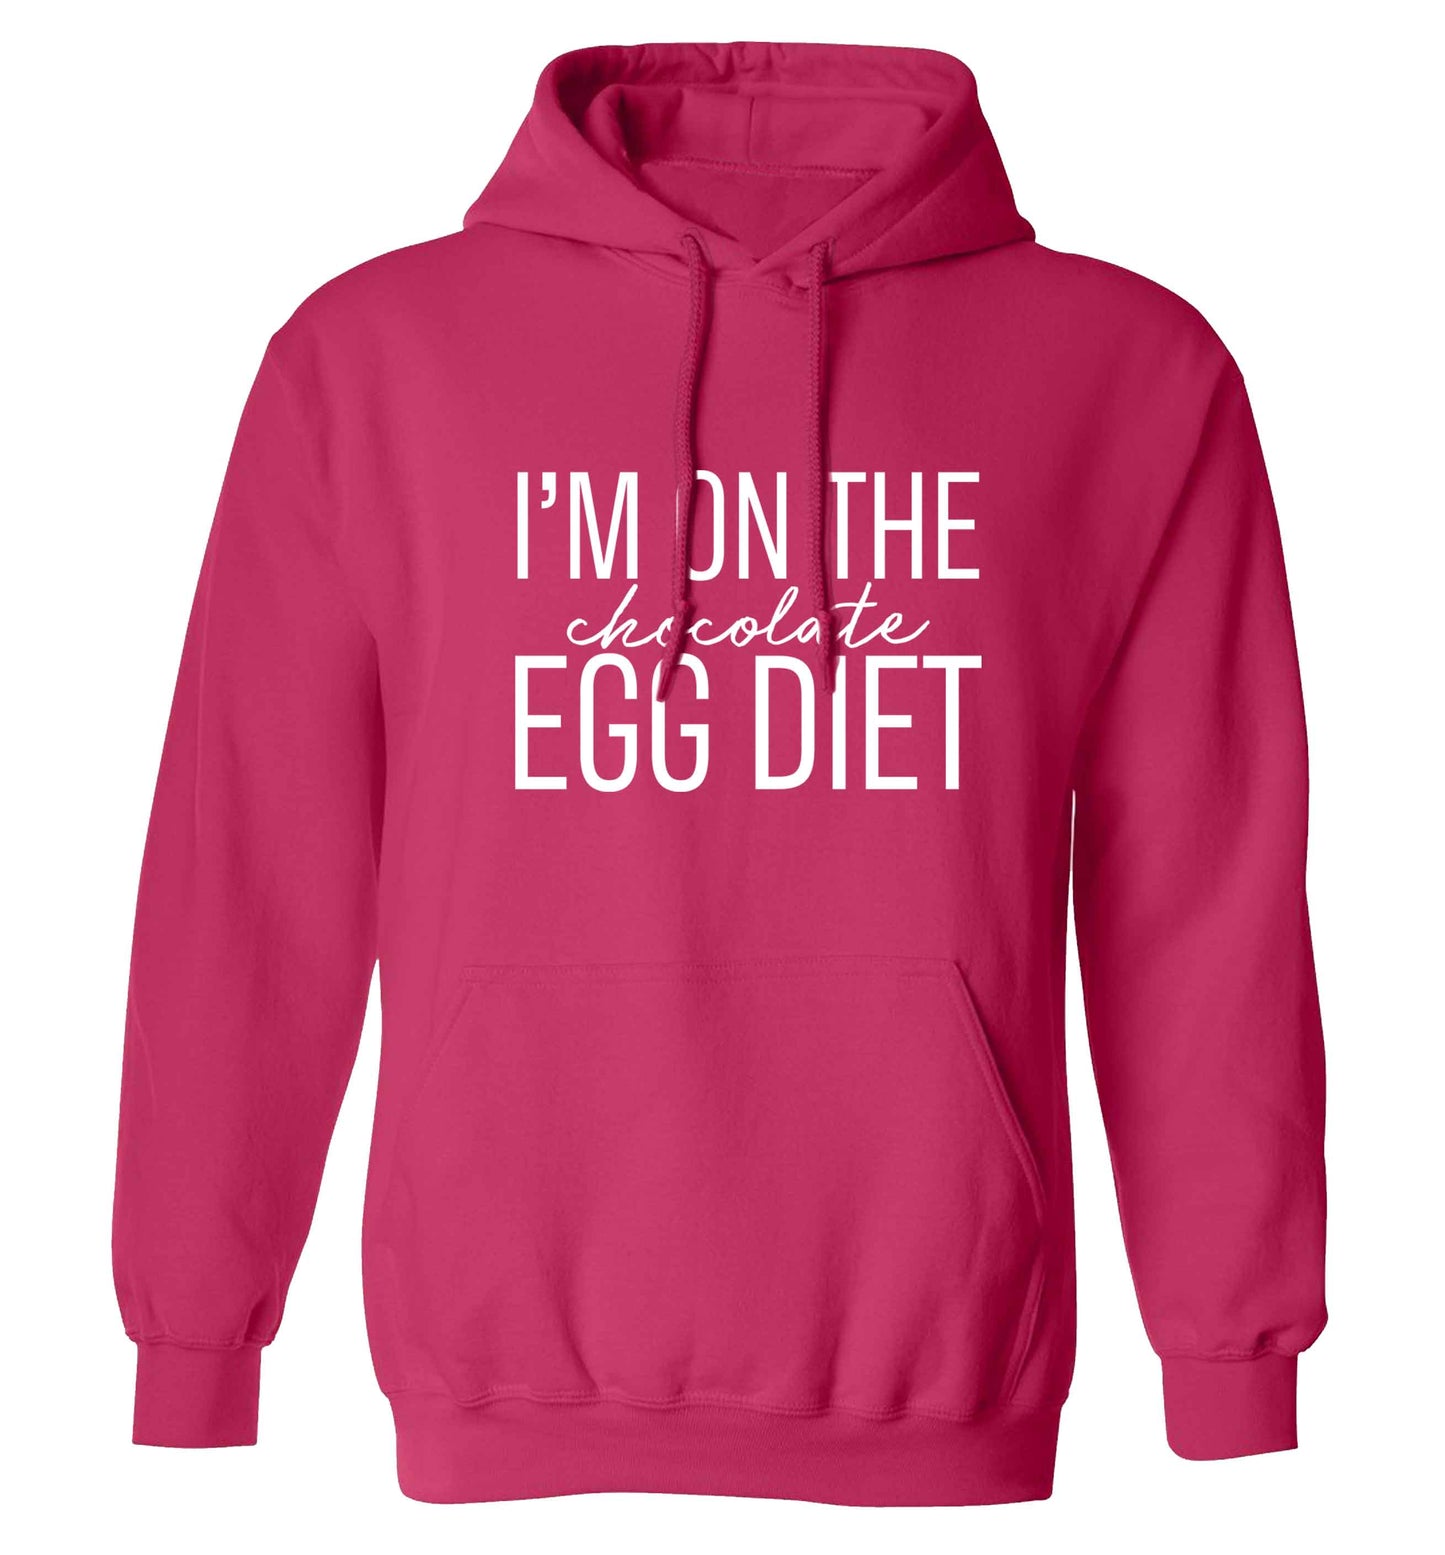 I'm on the chocolate egg diet adults unisex pink hoodie 2XL